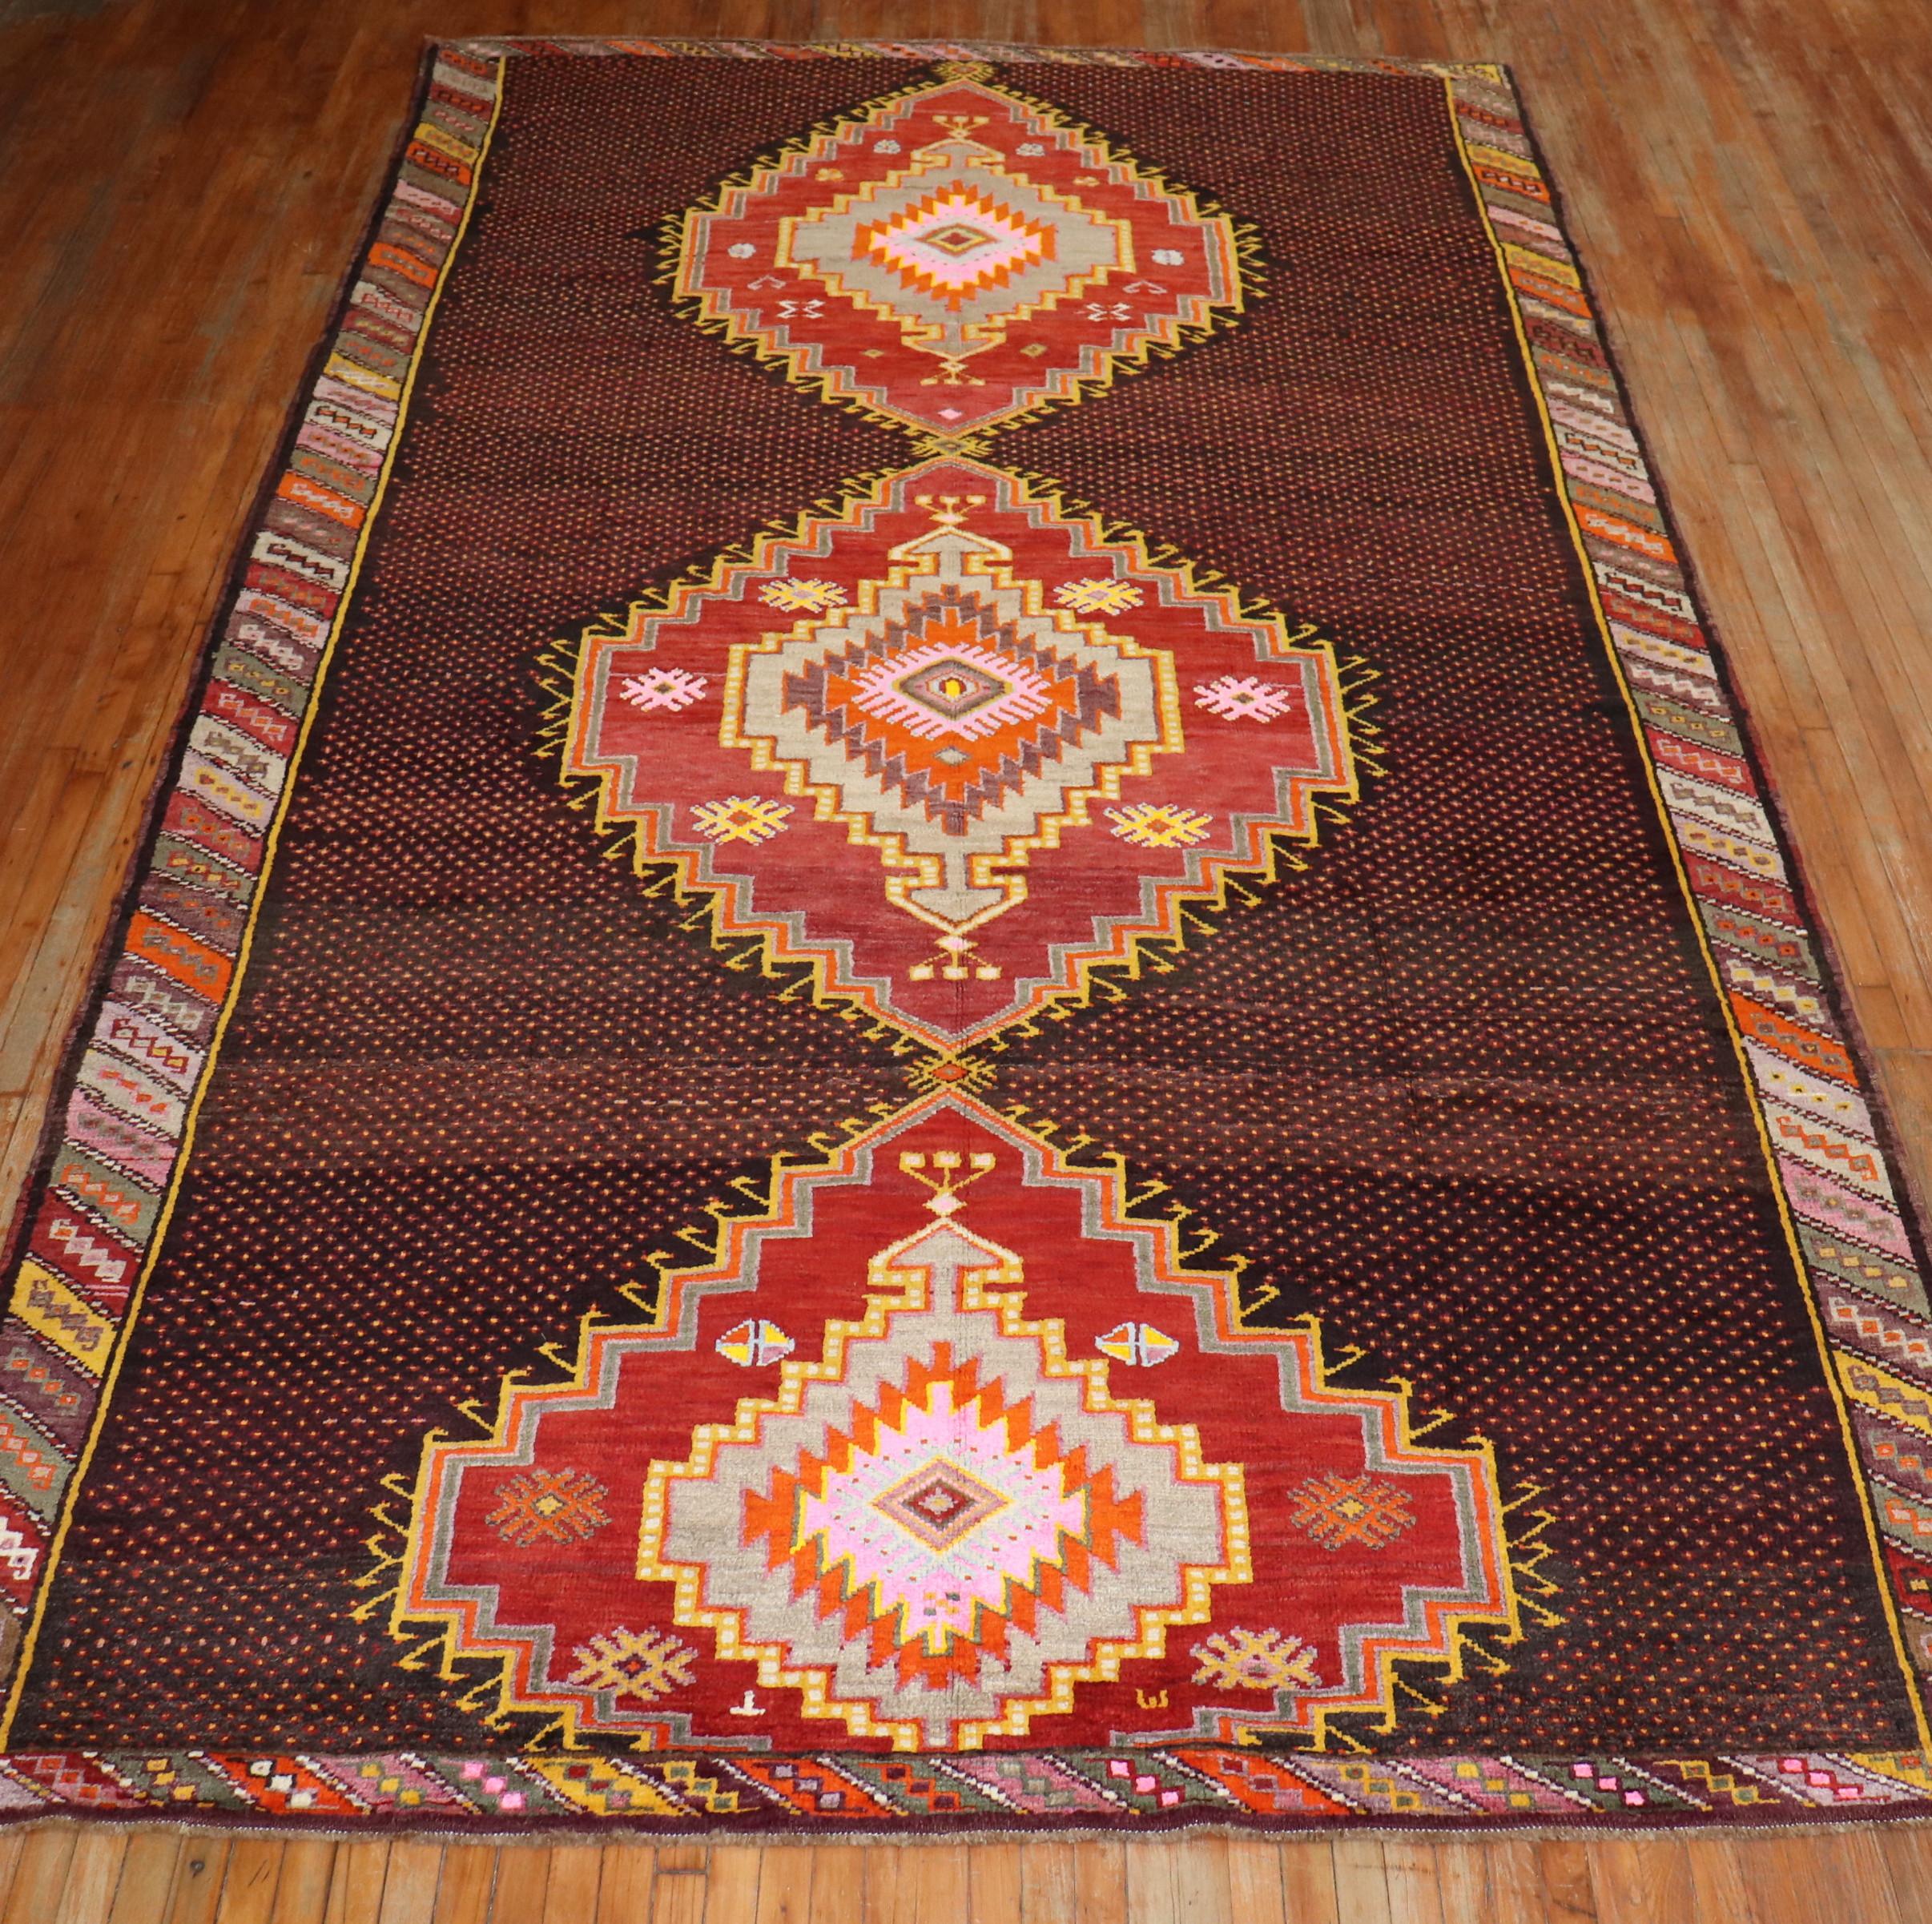 One of a kind corridor size Turkish Kars rug from the 20th century. A dark brown geometric field with saturated colors in brown, pink red, coral, orange mustard and green.

Measures: 8'8